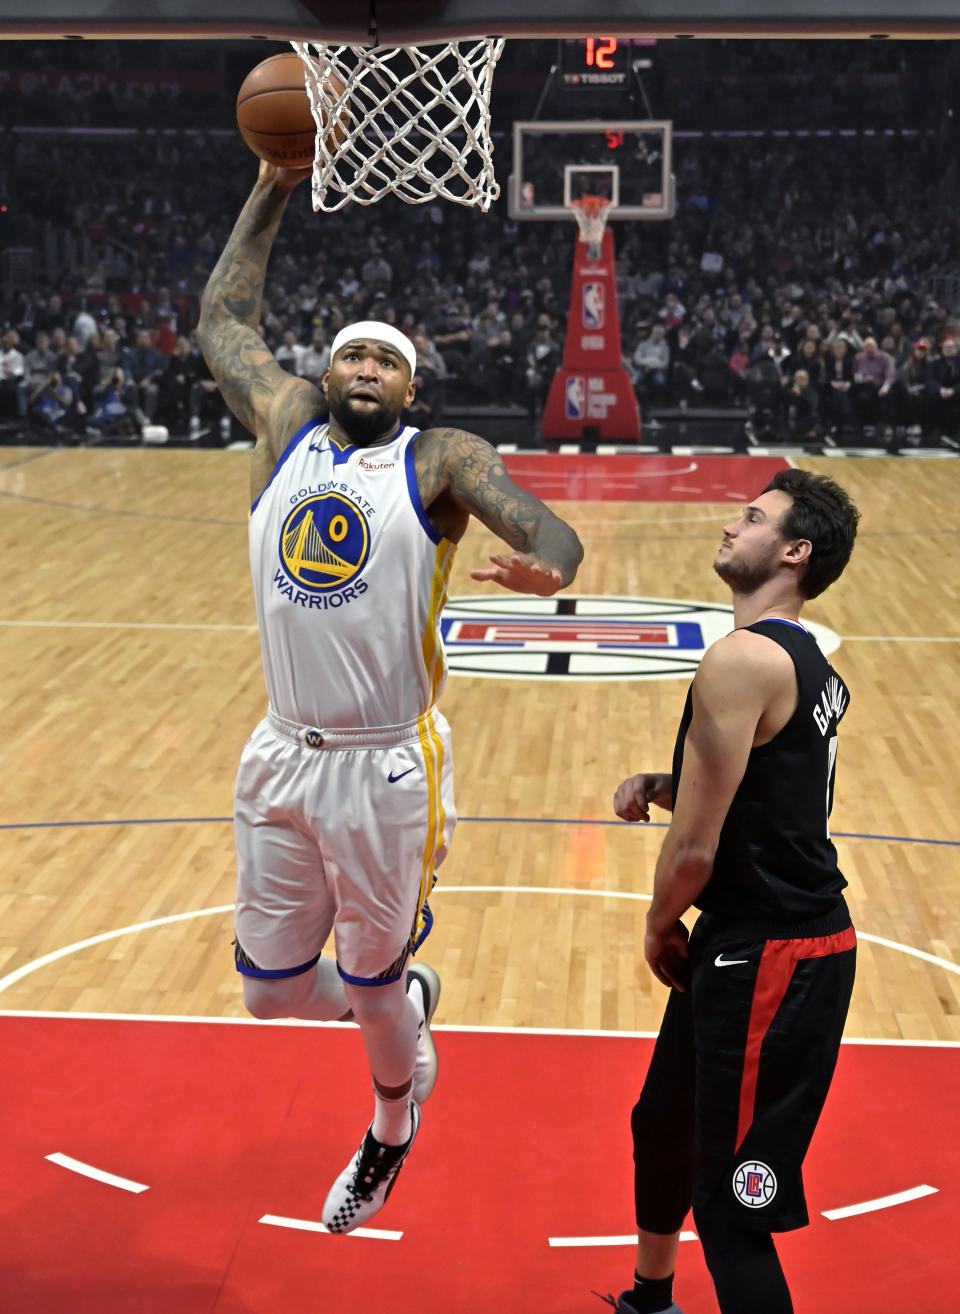 Golden State Warriors center DeMarcus Cousins, left, goes up for a dunk as Los Angeles Clippers forward Danilo Gallinari watches during the first half of an NBA basketball game Friday, Jan. 18, 2019, in Los Angeles. (AP Photo/Mark J. Terrill)